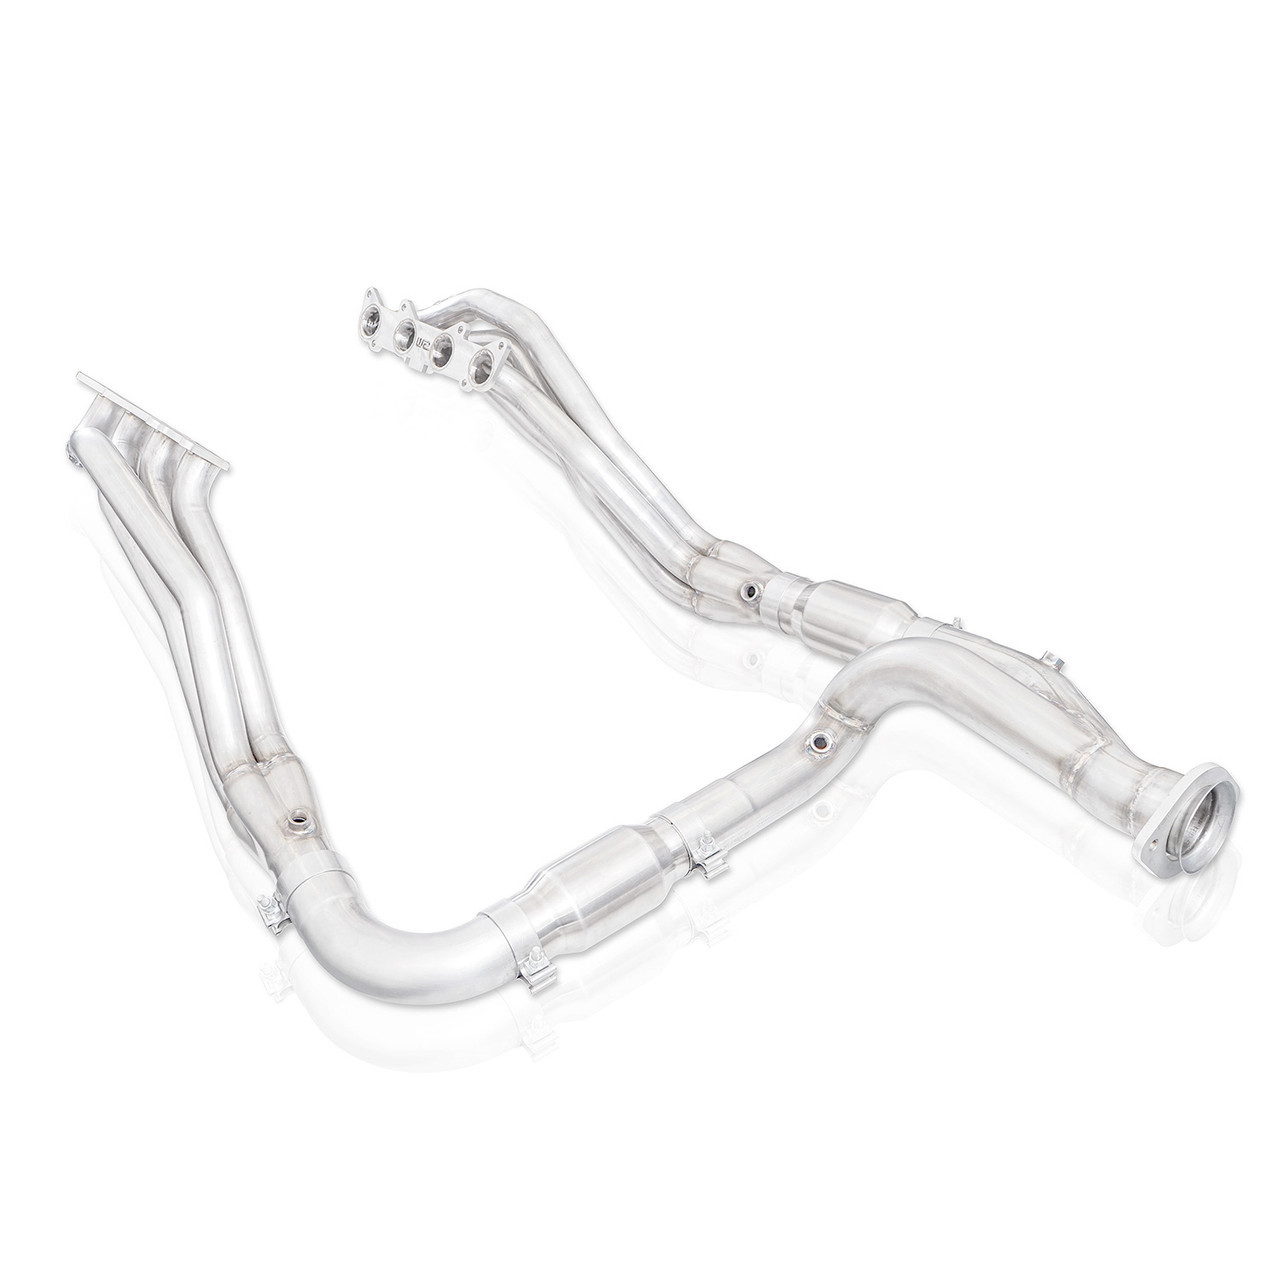 Stainless Works FT18HCATY Headers, Long Tube, 1-7/8 in Primary, 3 in Collector, Catalytic Converters Included, Stainless, Natural, Ford Modular, Ford Fullsize Truck 2015-20, Kit